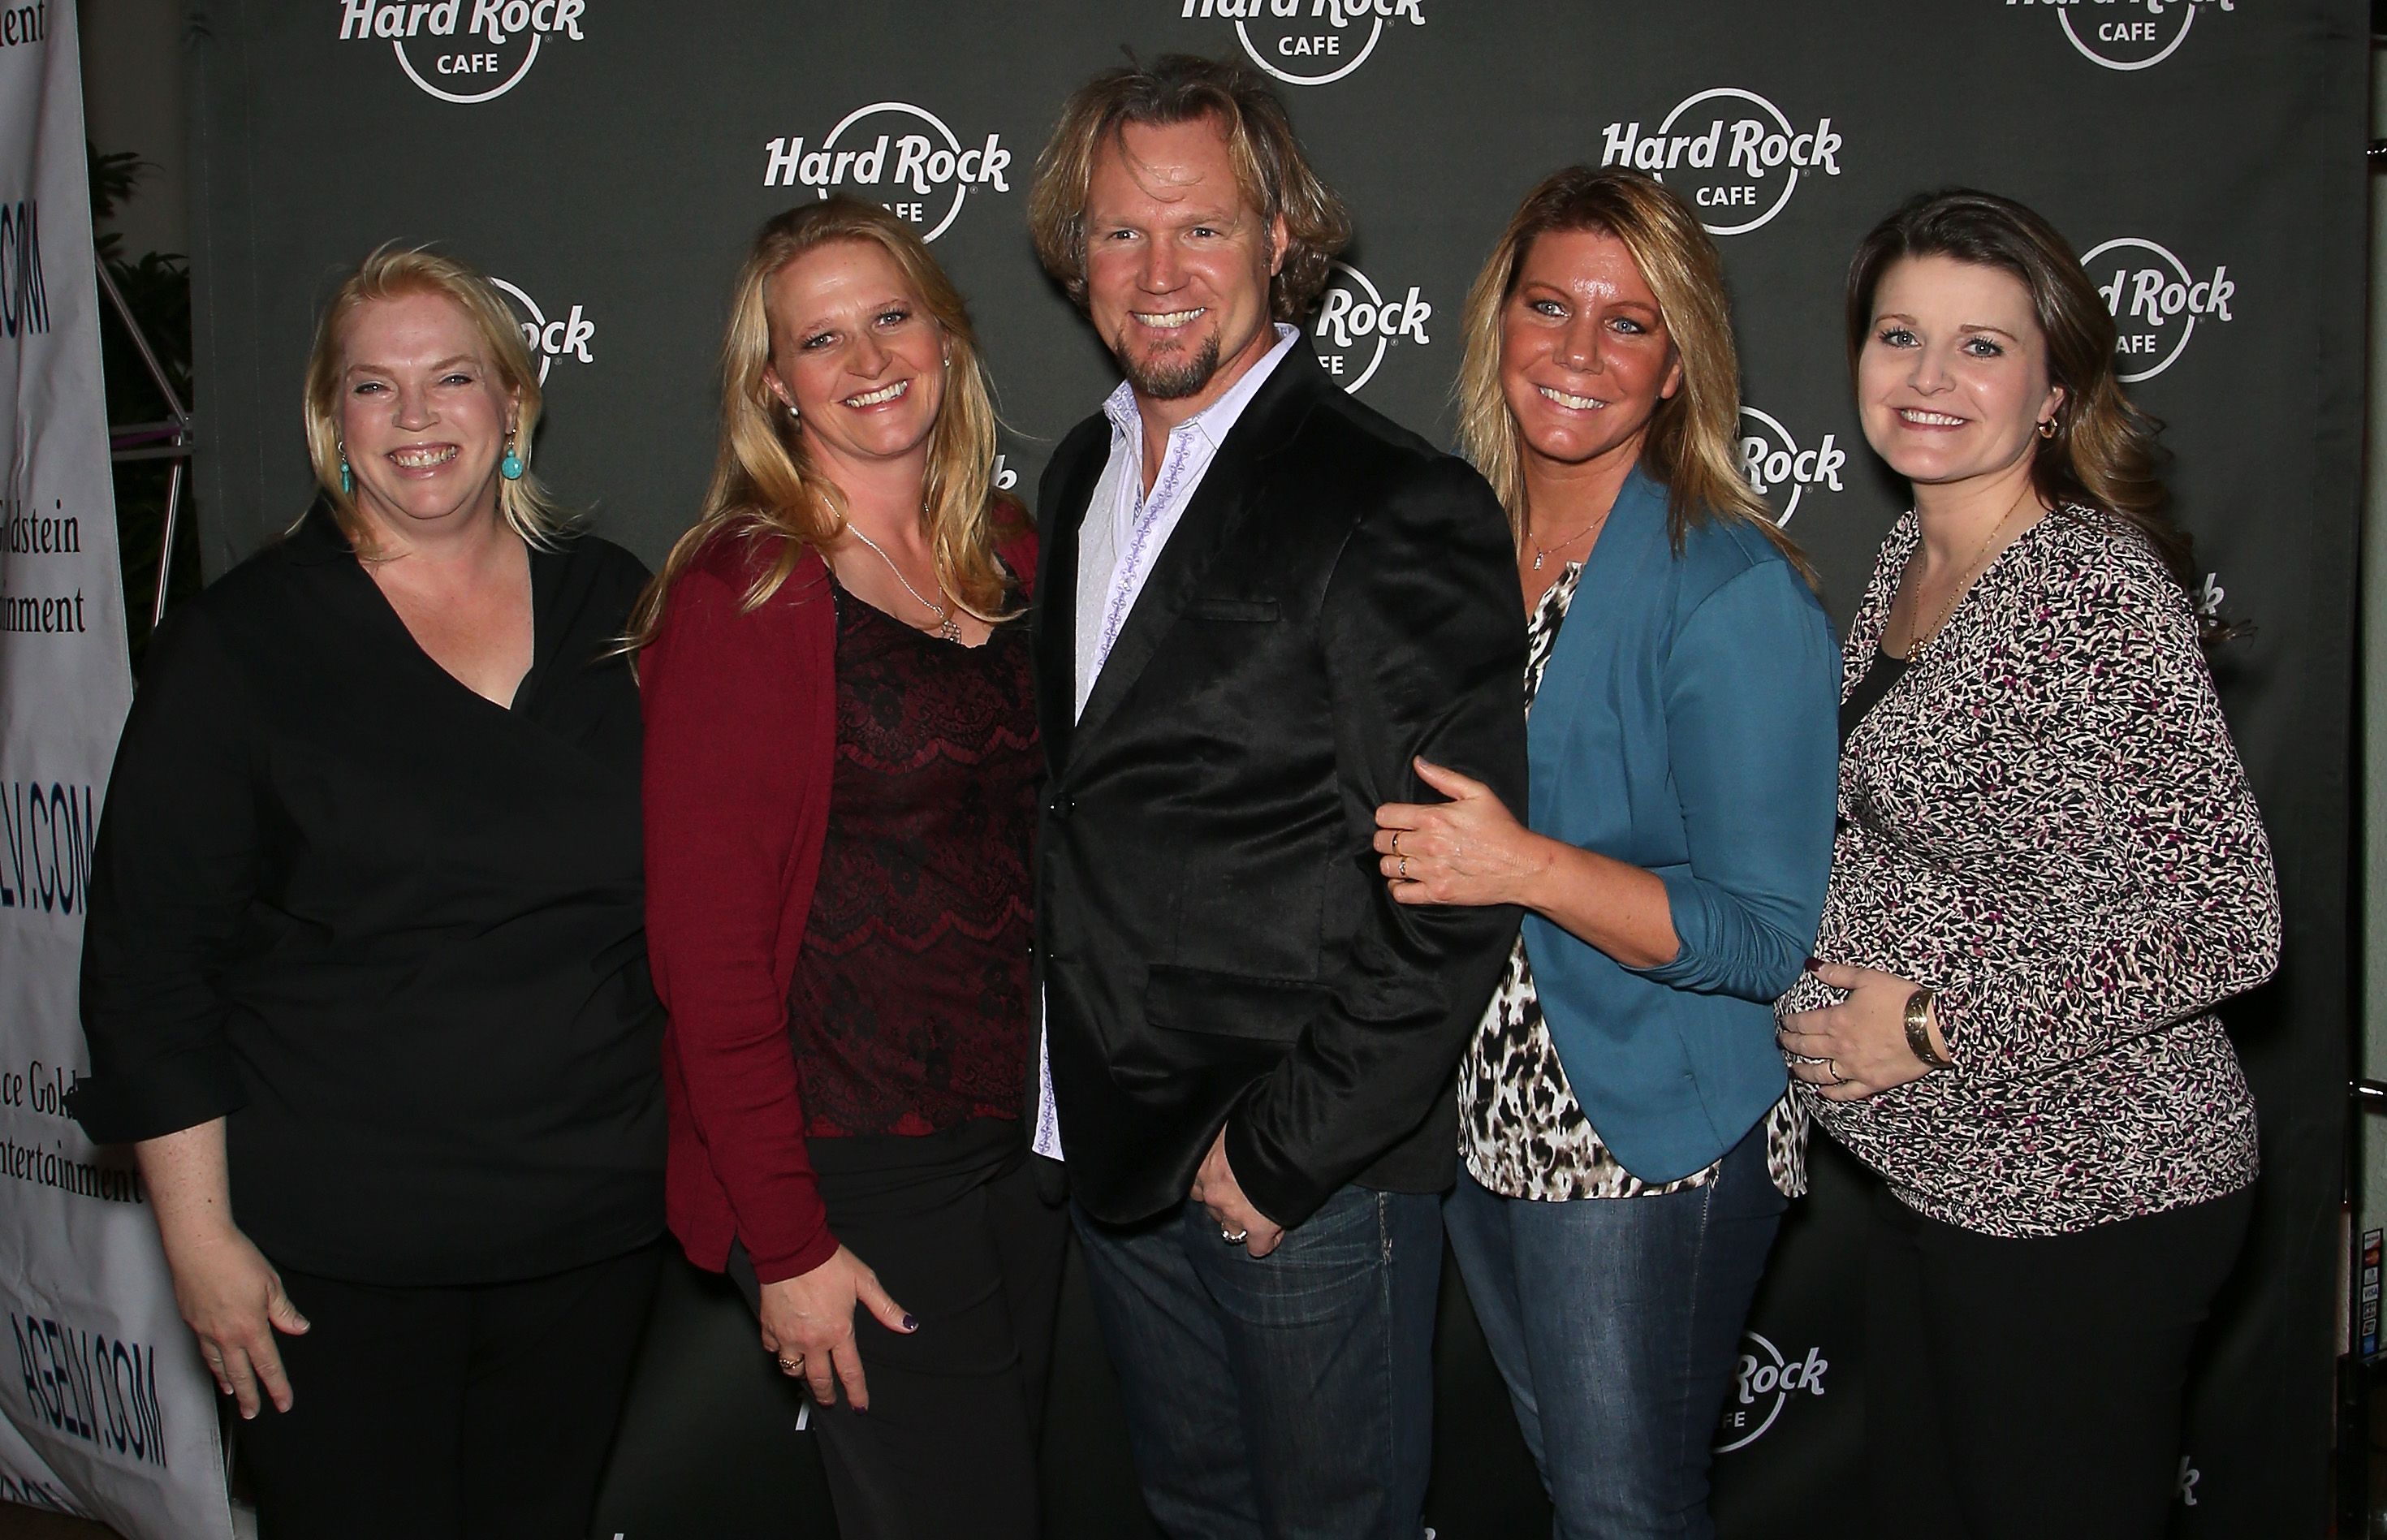 Kody Brown and his wives Janelle Brown, Christine Brown, Meri Brown and Robyn Brown, at Hard Rock Cafe Las Vegas on October 10, 2015 | Photo: Getty Images